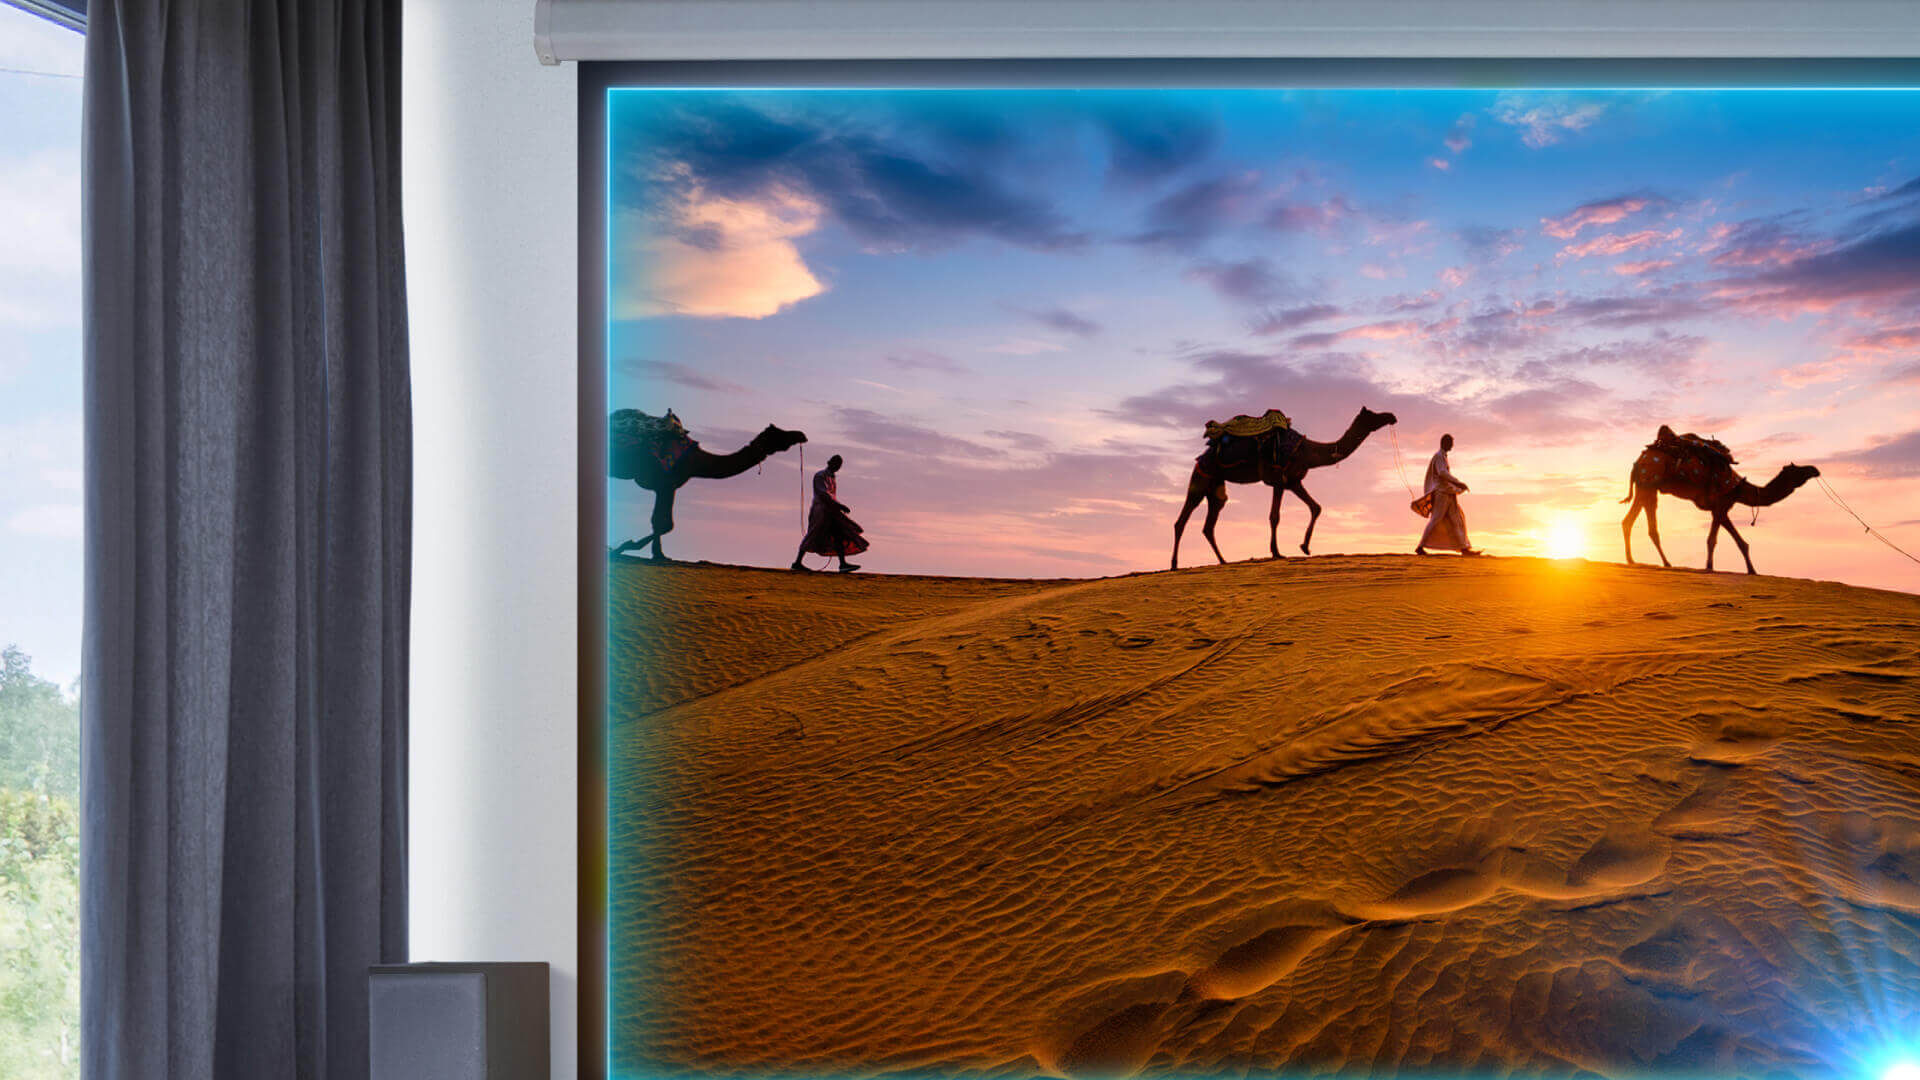 Experience TK710's stunning visuals with 3200lm brightness, 600,000:1 contrast ratio, ideal for brightly-lit living rooms